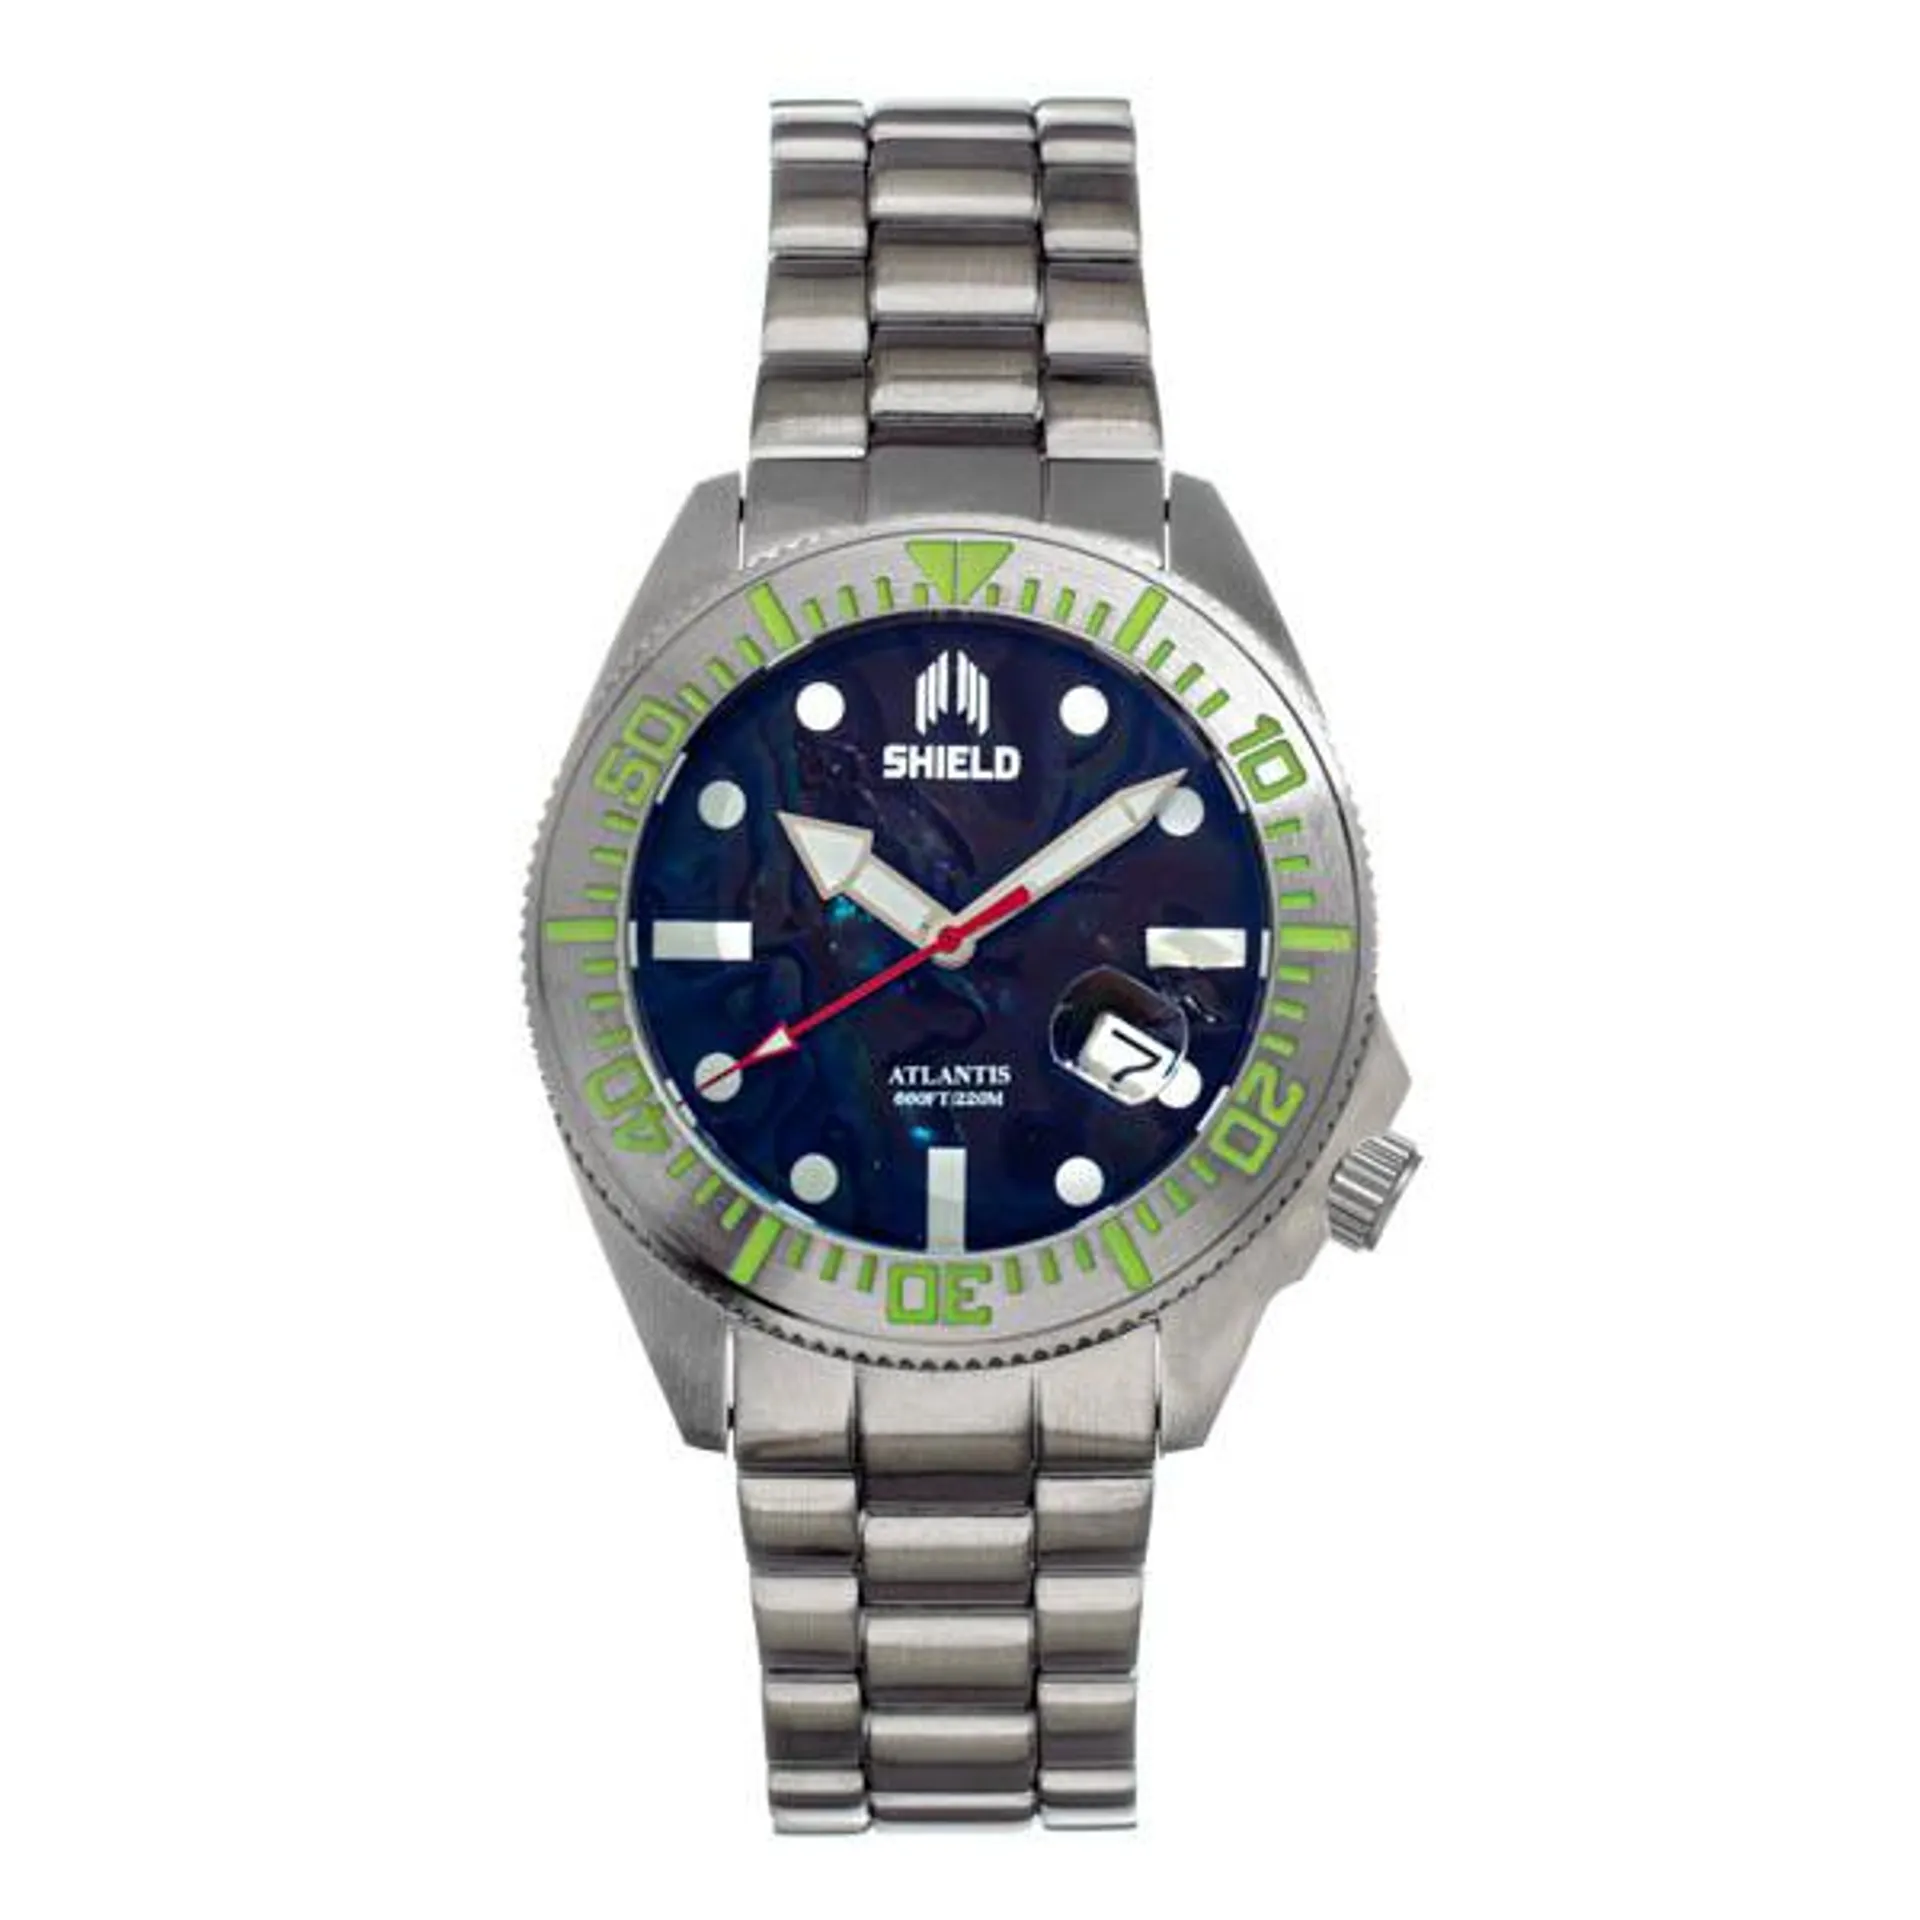 Shield Gents Atlantis Divers Automatic Watch on Stainless Steel Bracelet